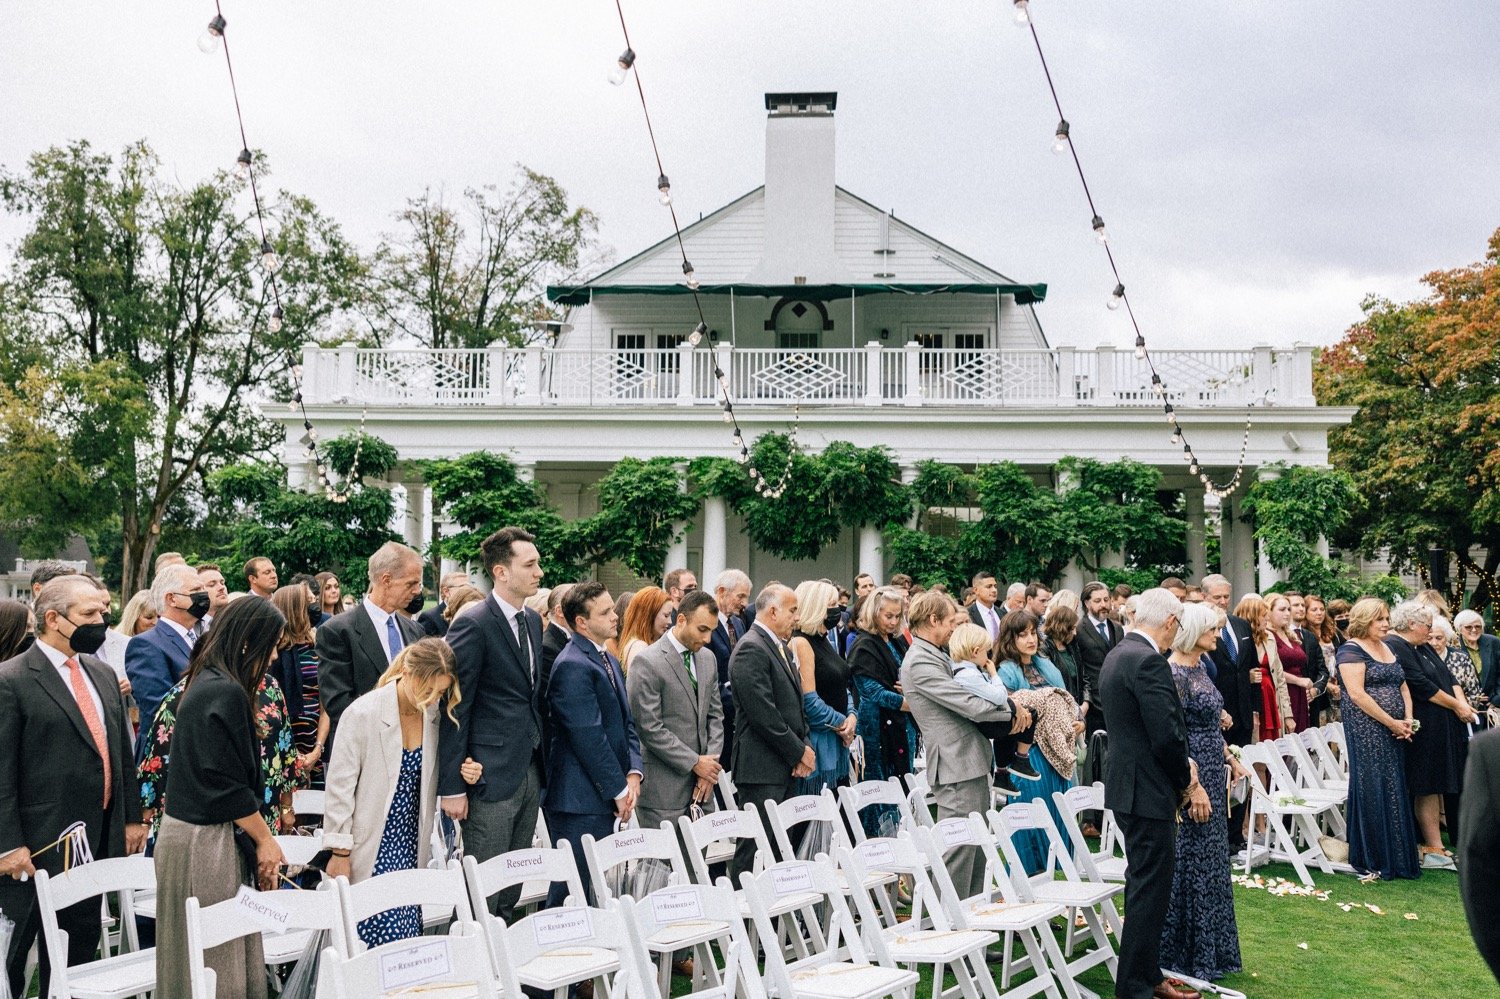  Guests stand during wedding ceremony at Waverley Country Club in Portland, Oregon 